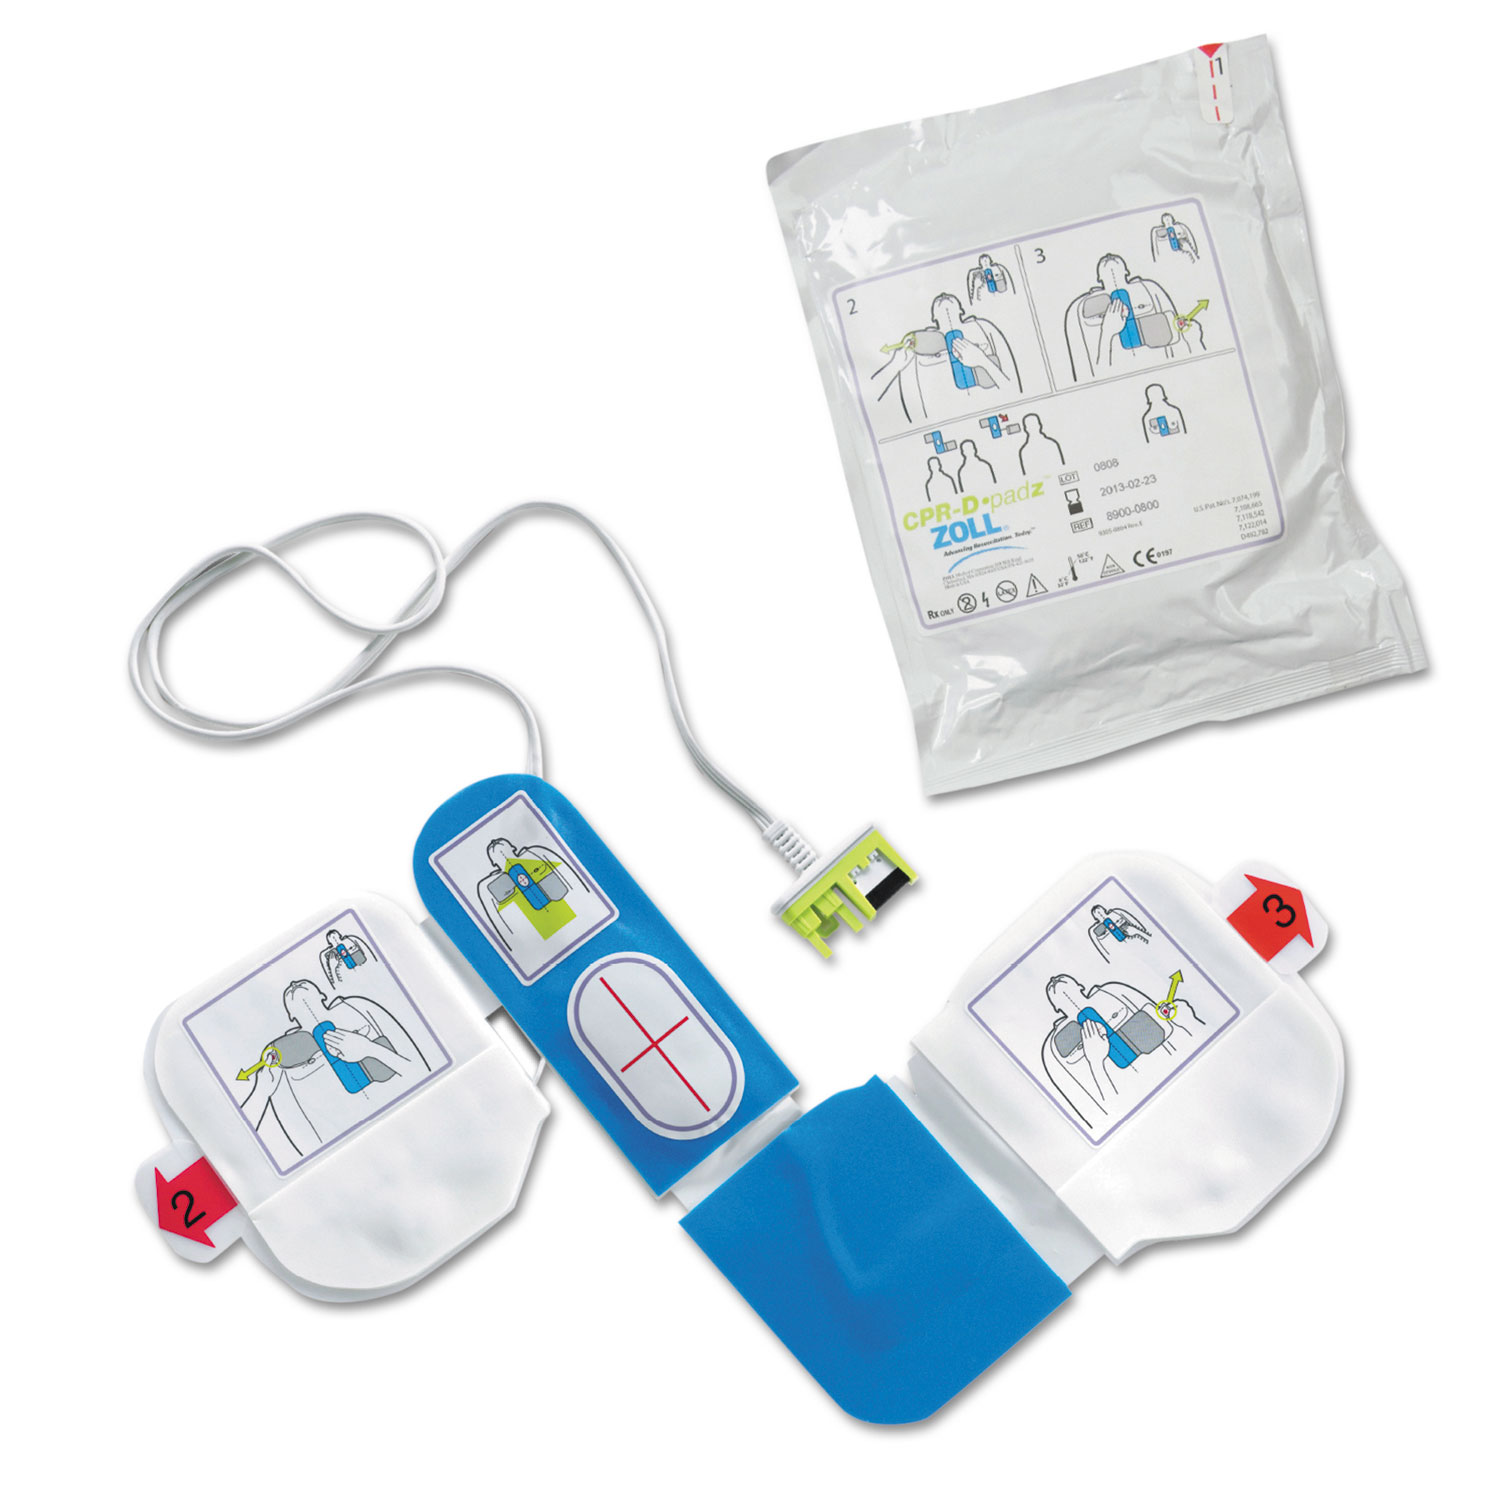  ZOLL 8900080001 CPR-D-Padz Adult Electrodes, 5-Year Shelf Life (ZOL8900080001) 